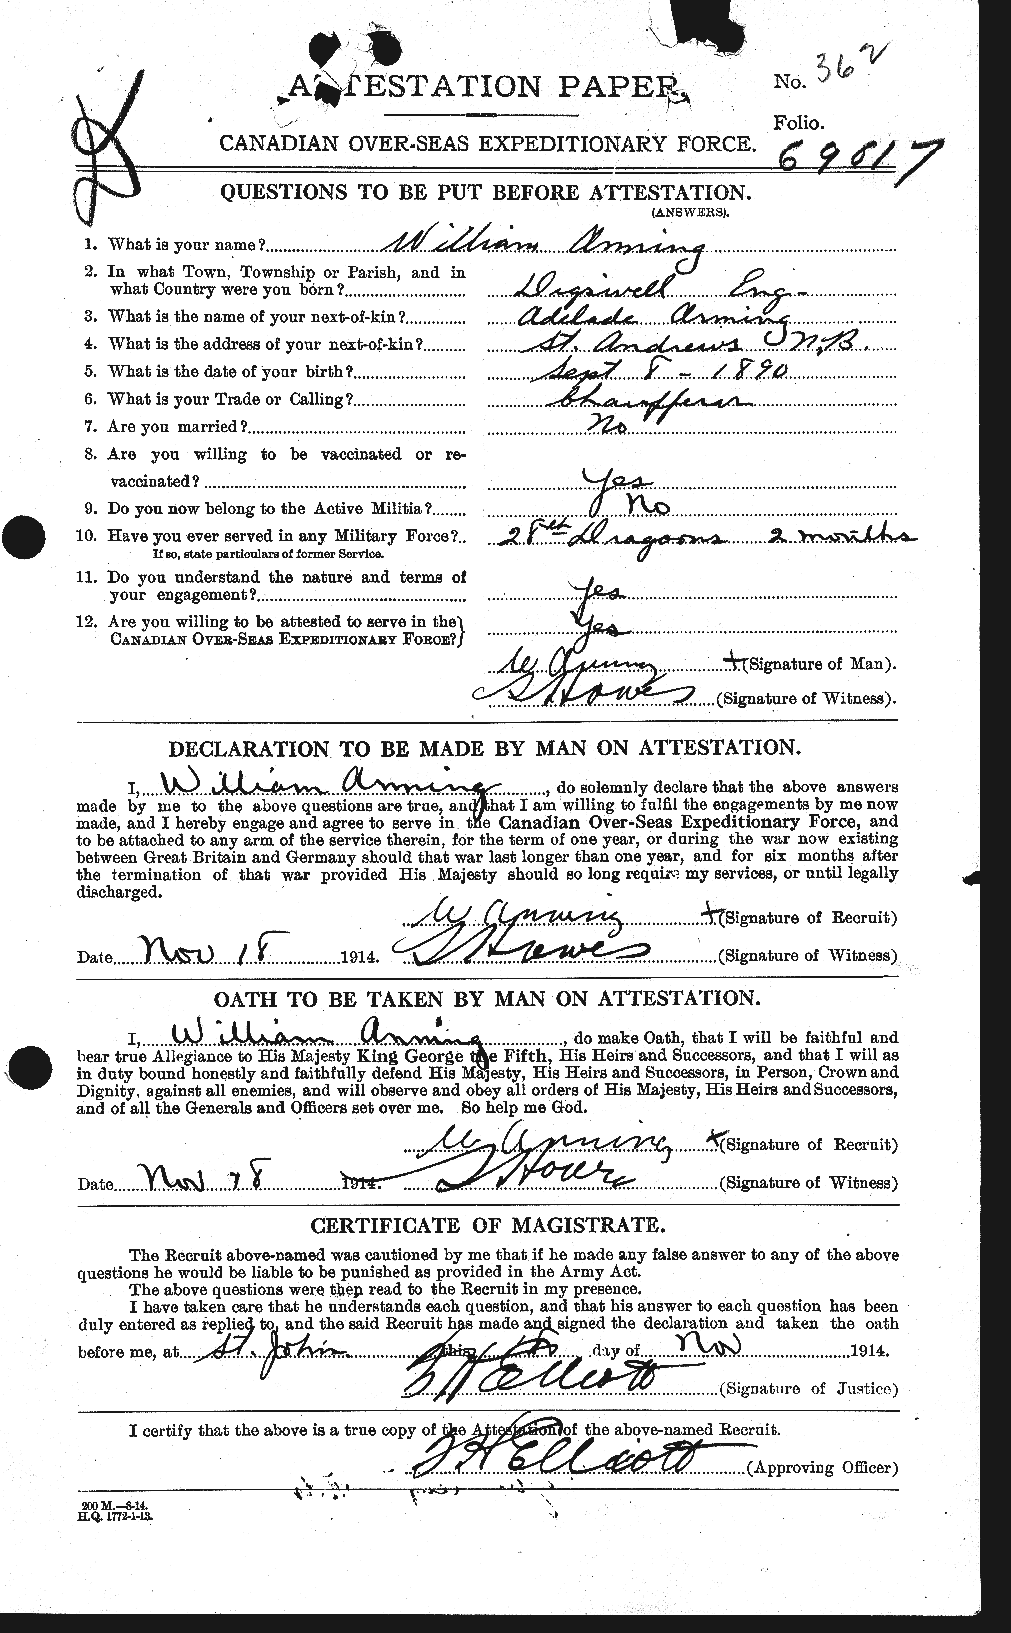 Personnel Records of the First World War - CEF 212422a